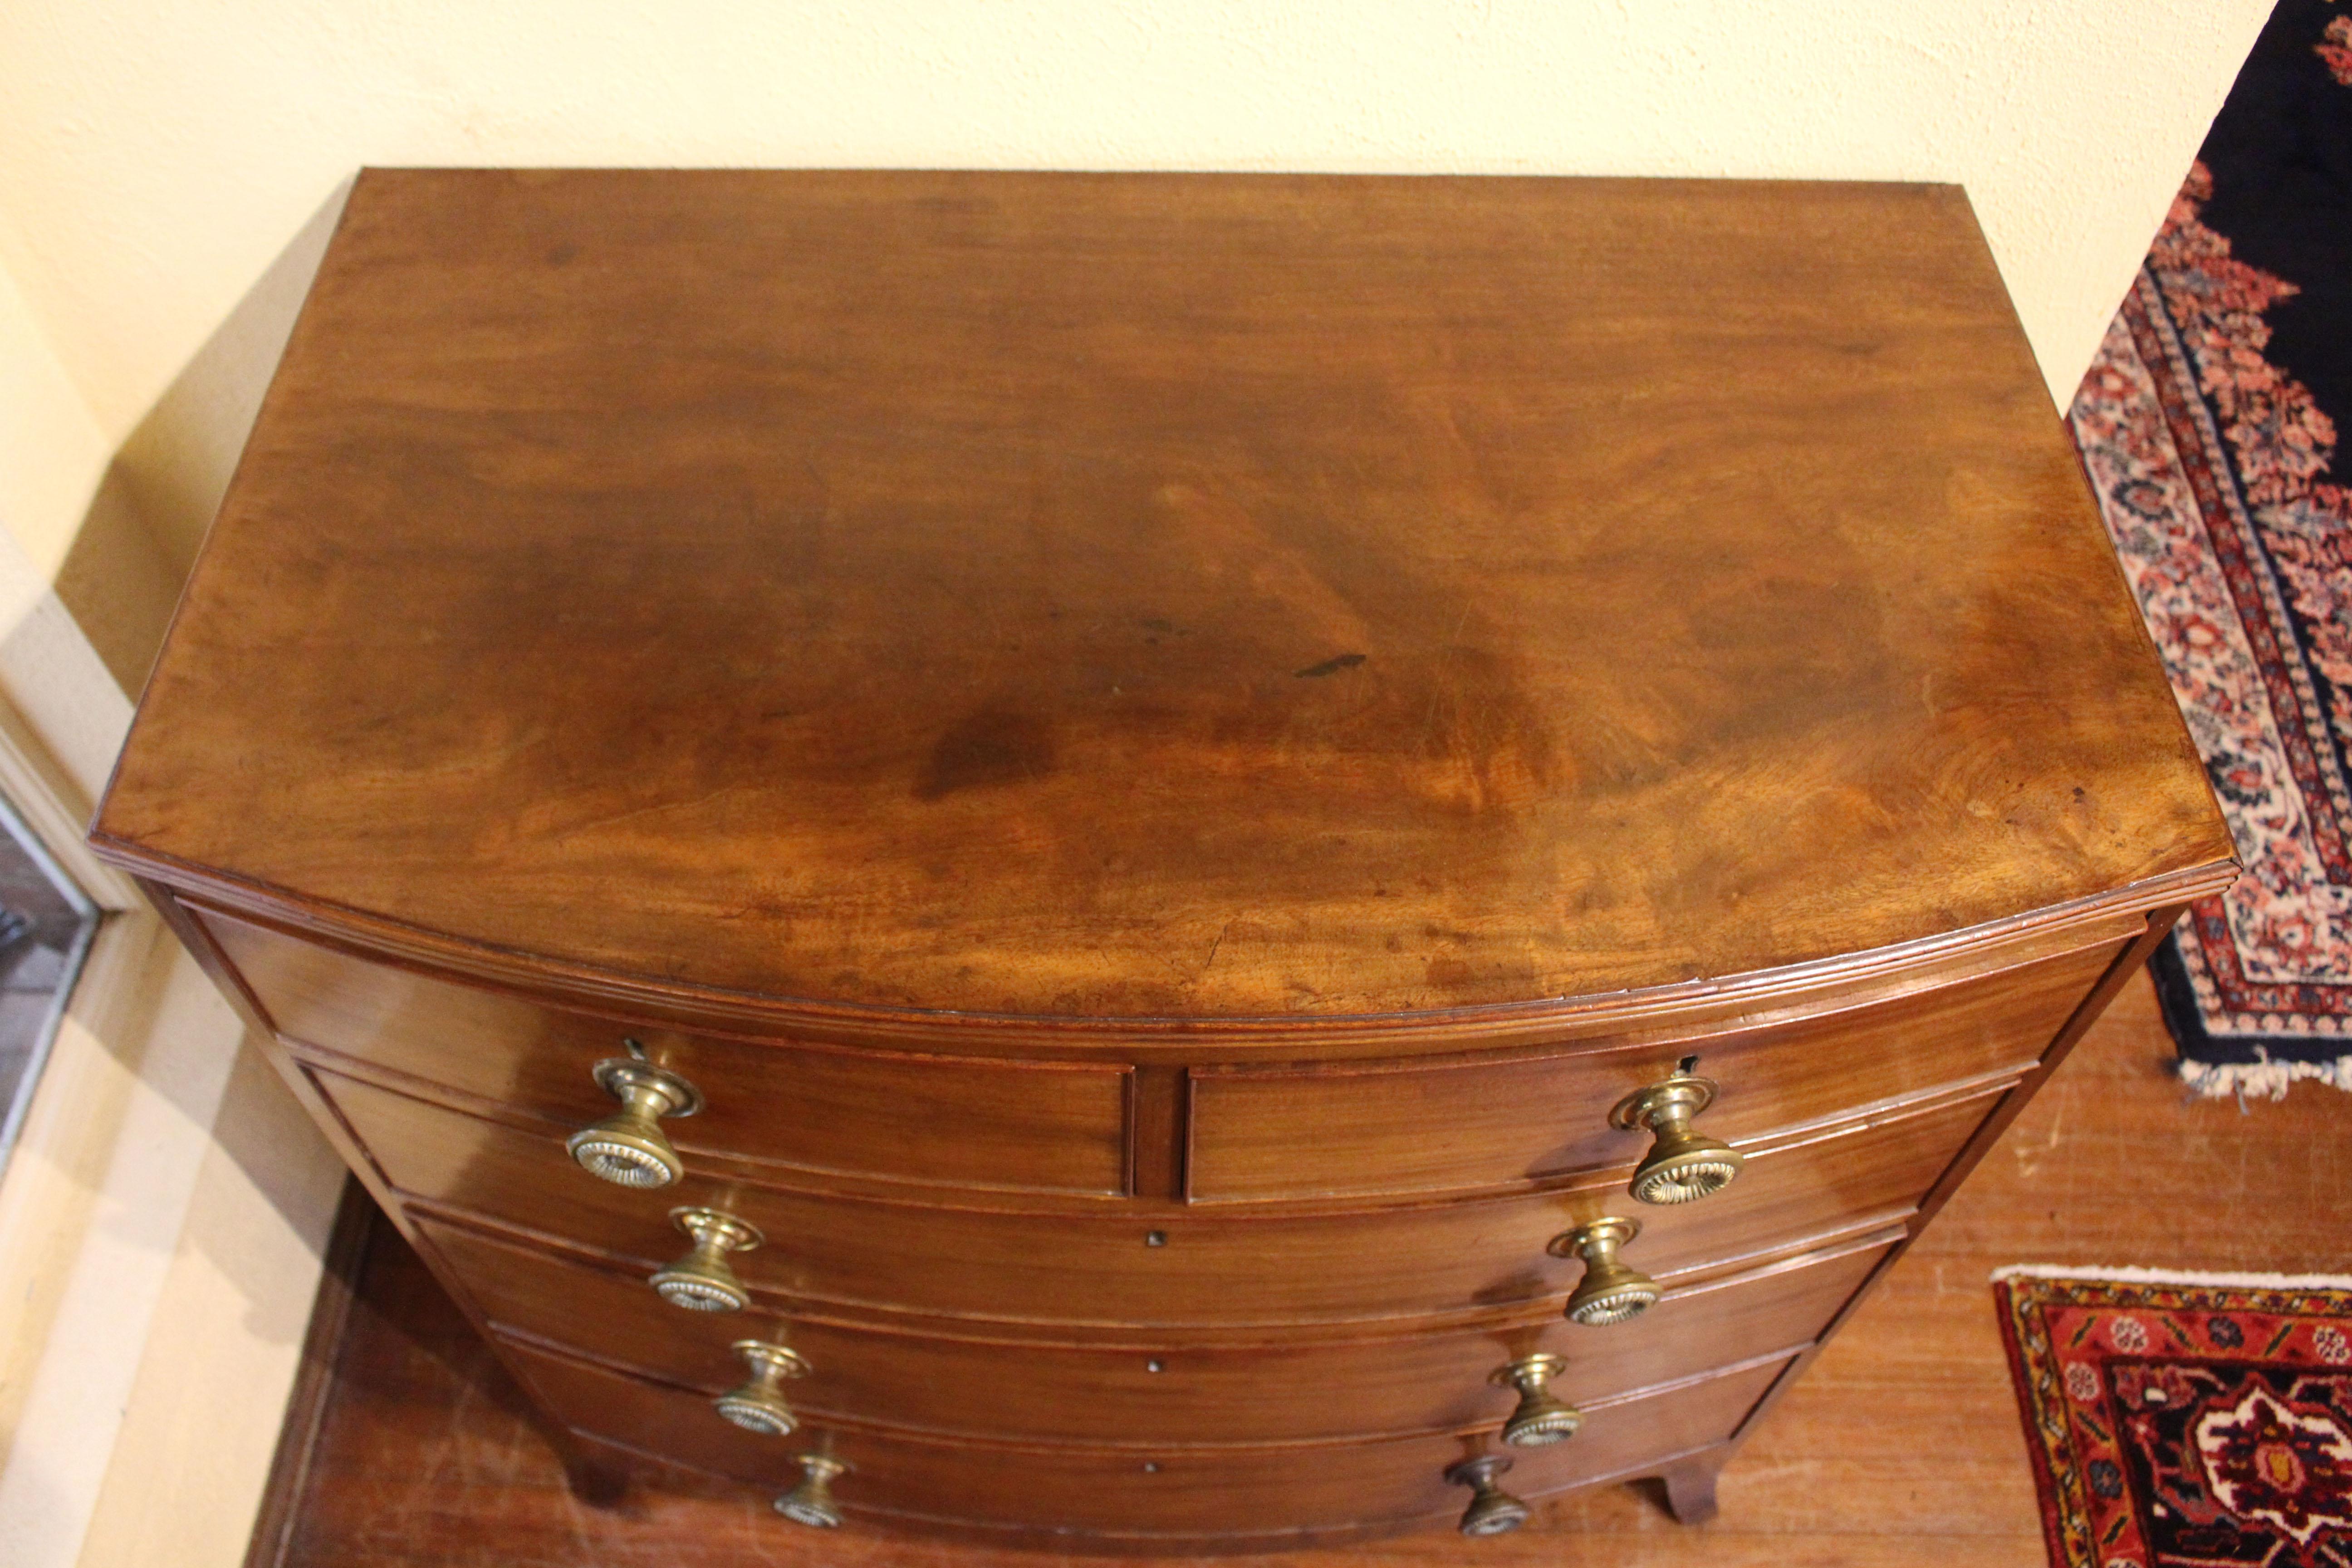 Early 19th Century Circa 1800 English Bowfront Chest of Drawers